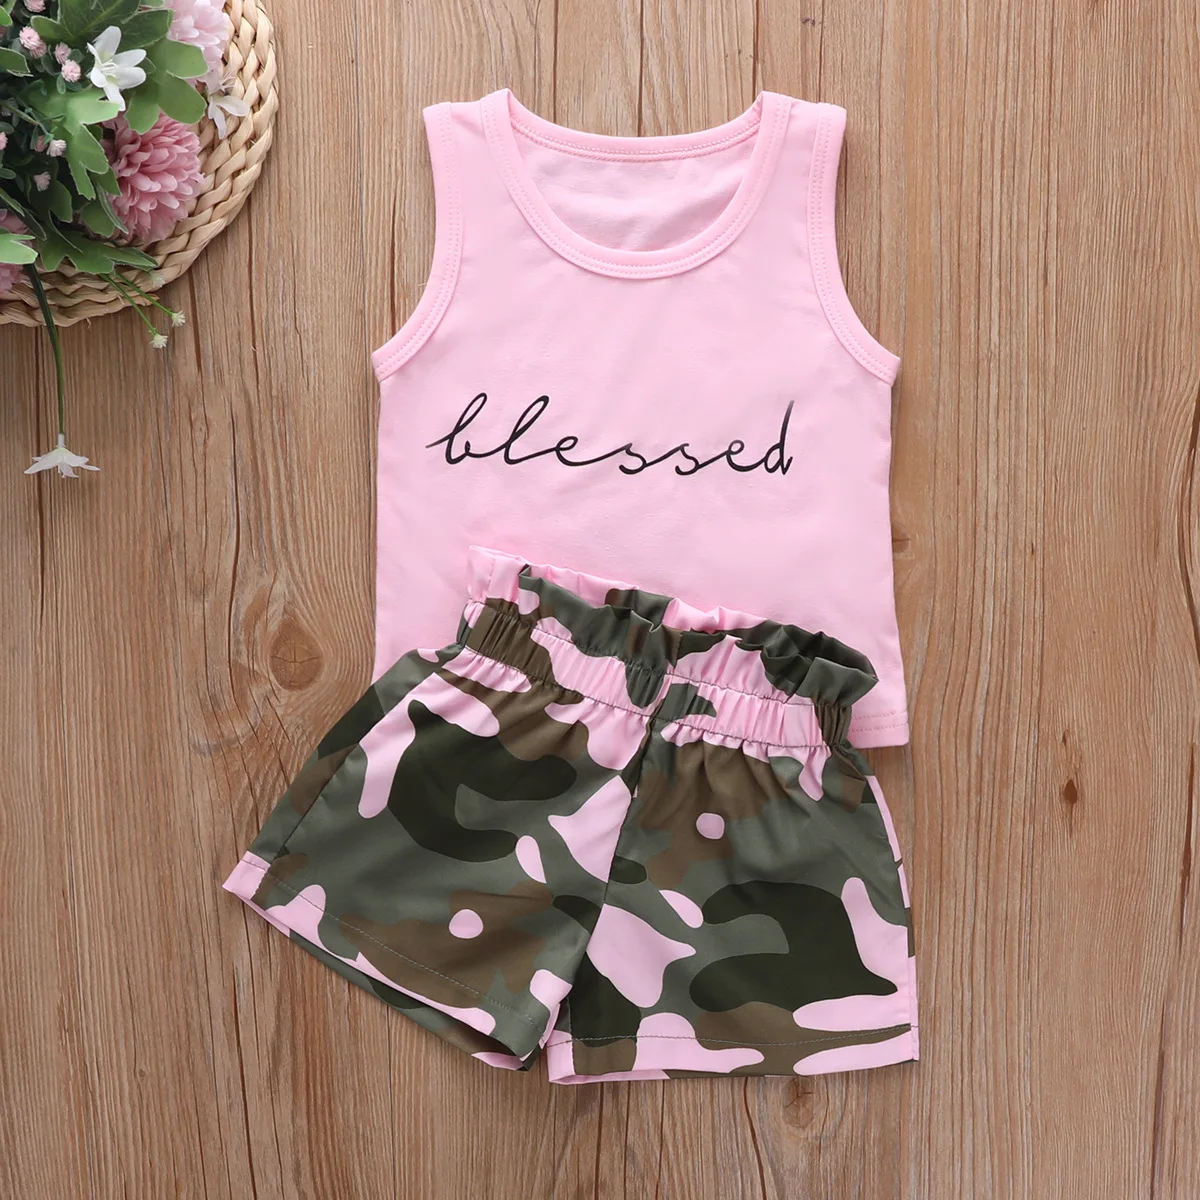 

2021 summer kids 1-6 years pink blessed print tank top with camo shorts girls clothing sets